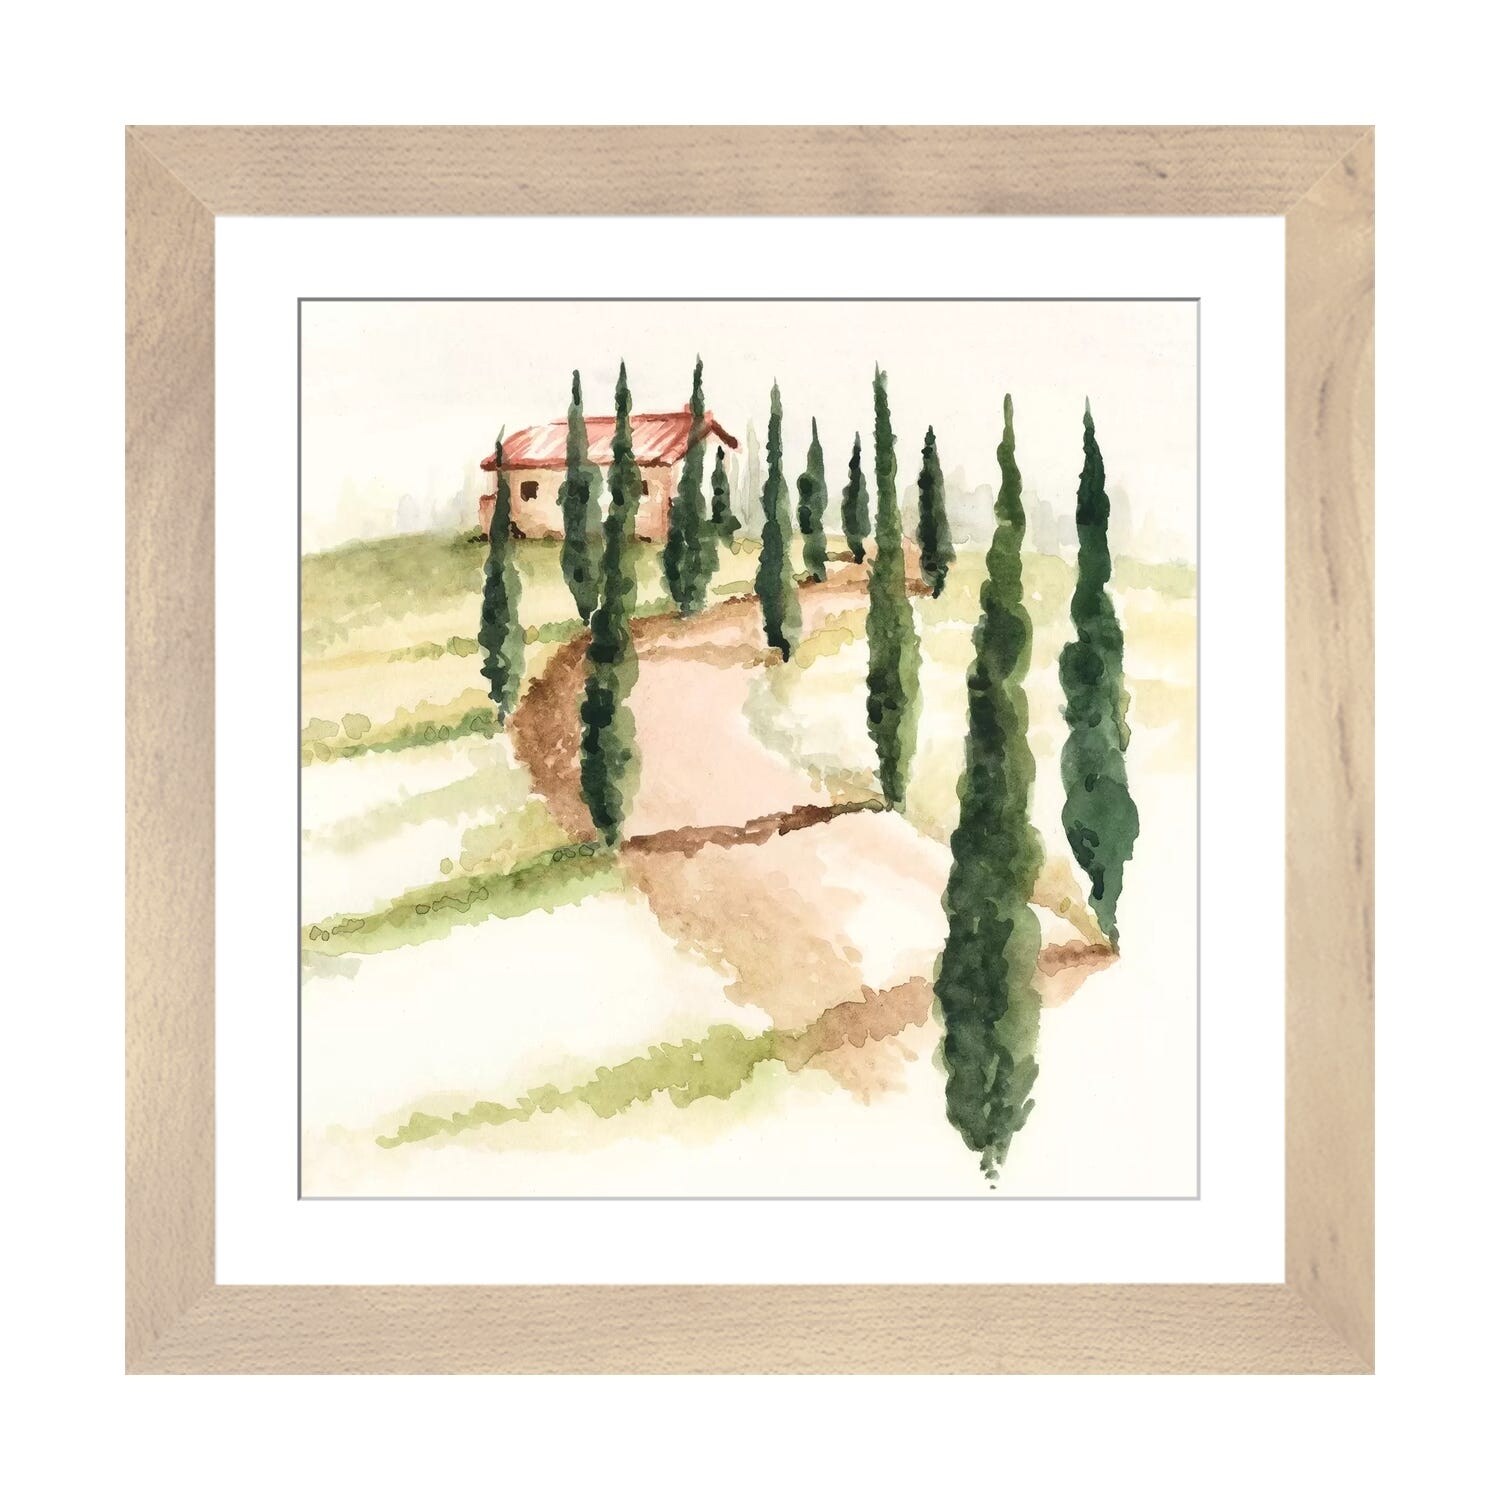 https://ak1.ostkcdn.com/images/products/is/images/direct/3760a8bb290005ae32539c07aef30f724148a5cf/iCanvas-%22Tuscan-Villa-III%22-by-Jennifer-Paxton-Parker.jpg